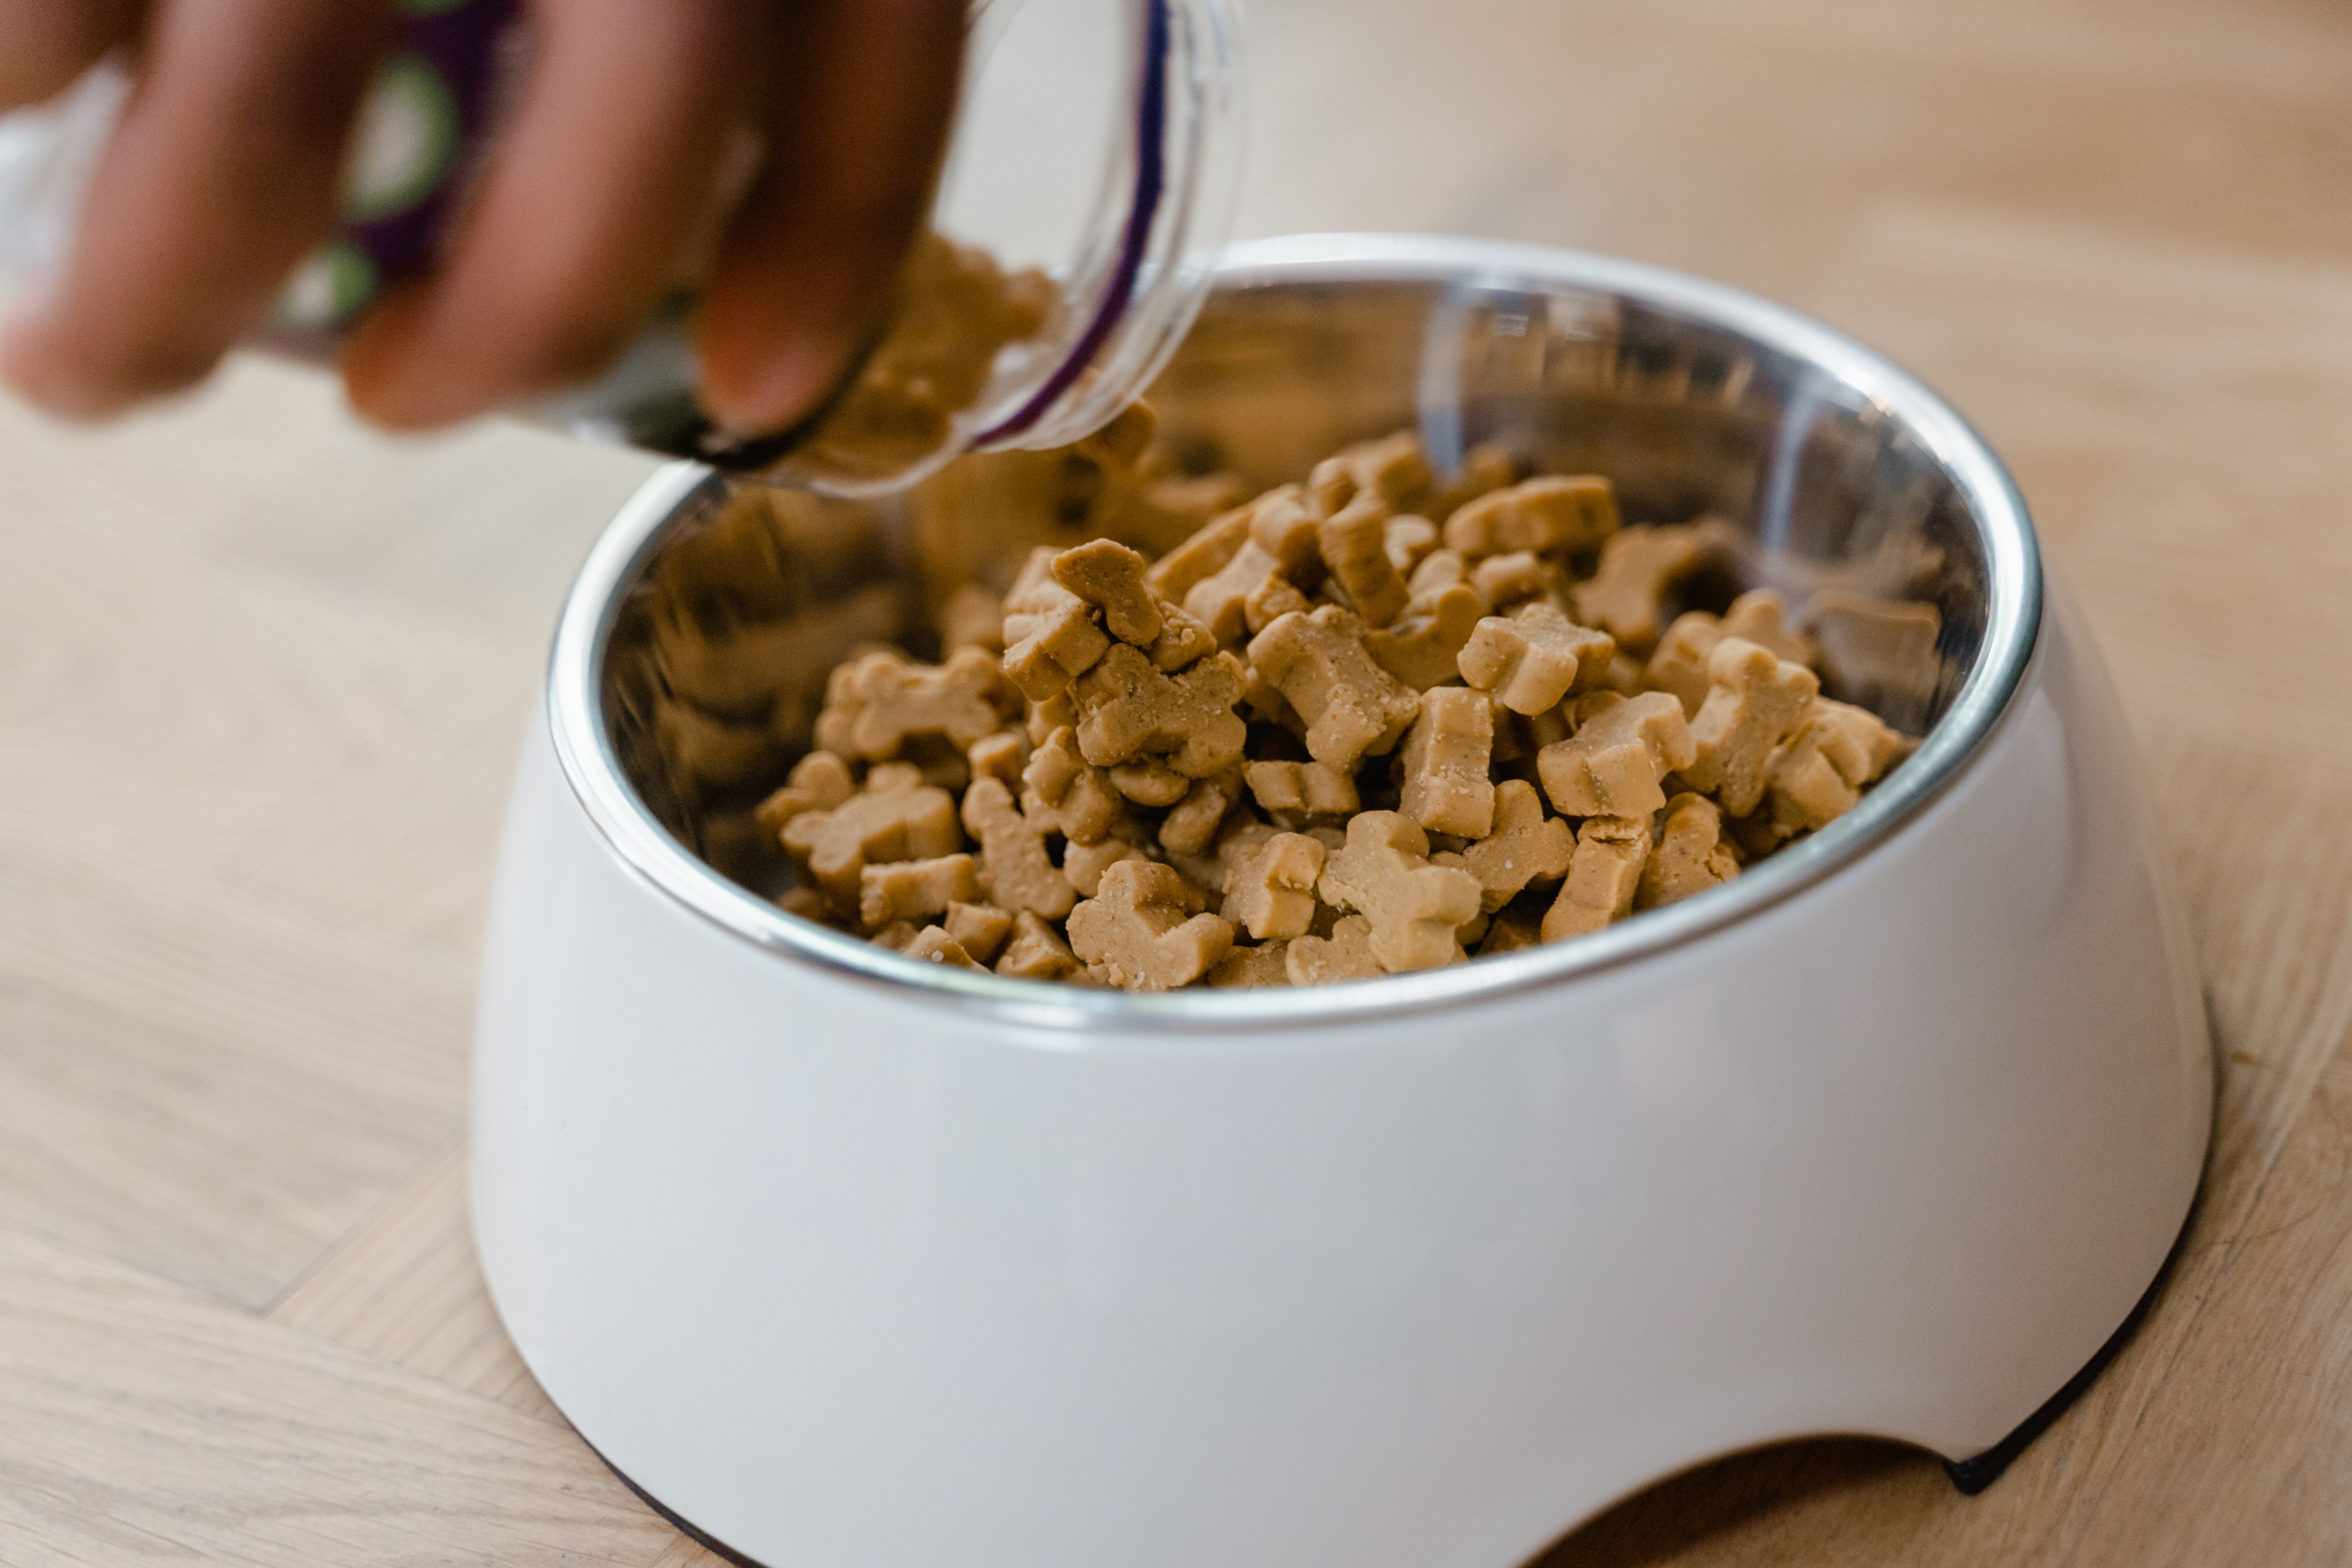 Commercial pet food put in a bowl.